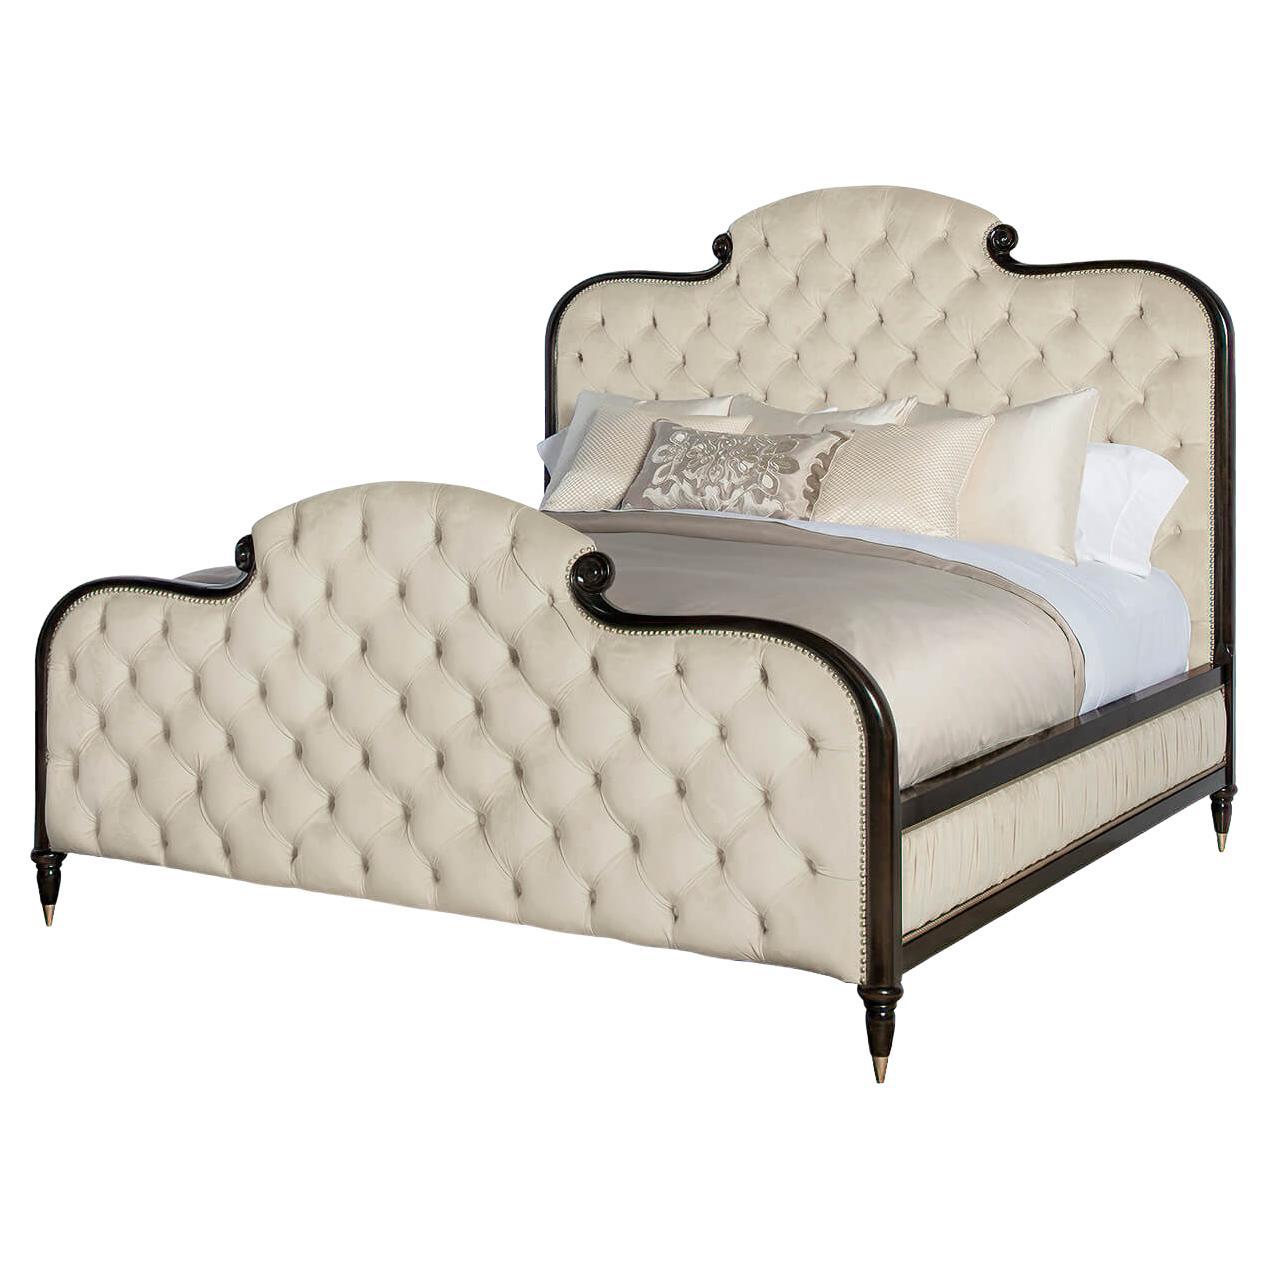 English Regency Tufted Queen Size Bed